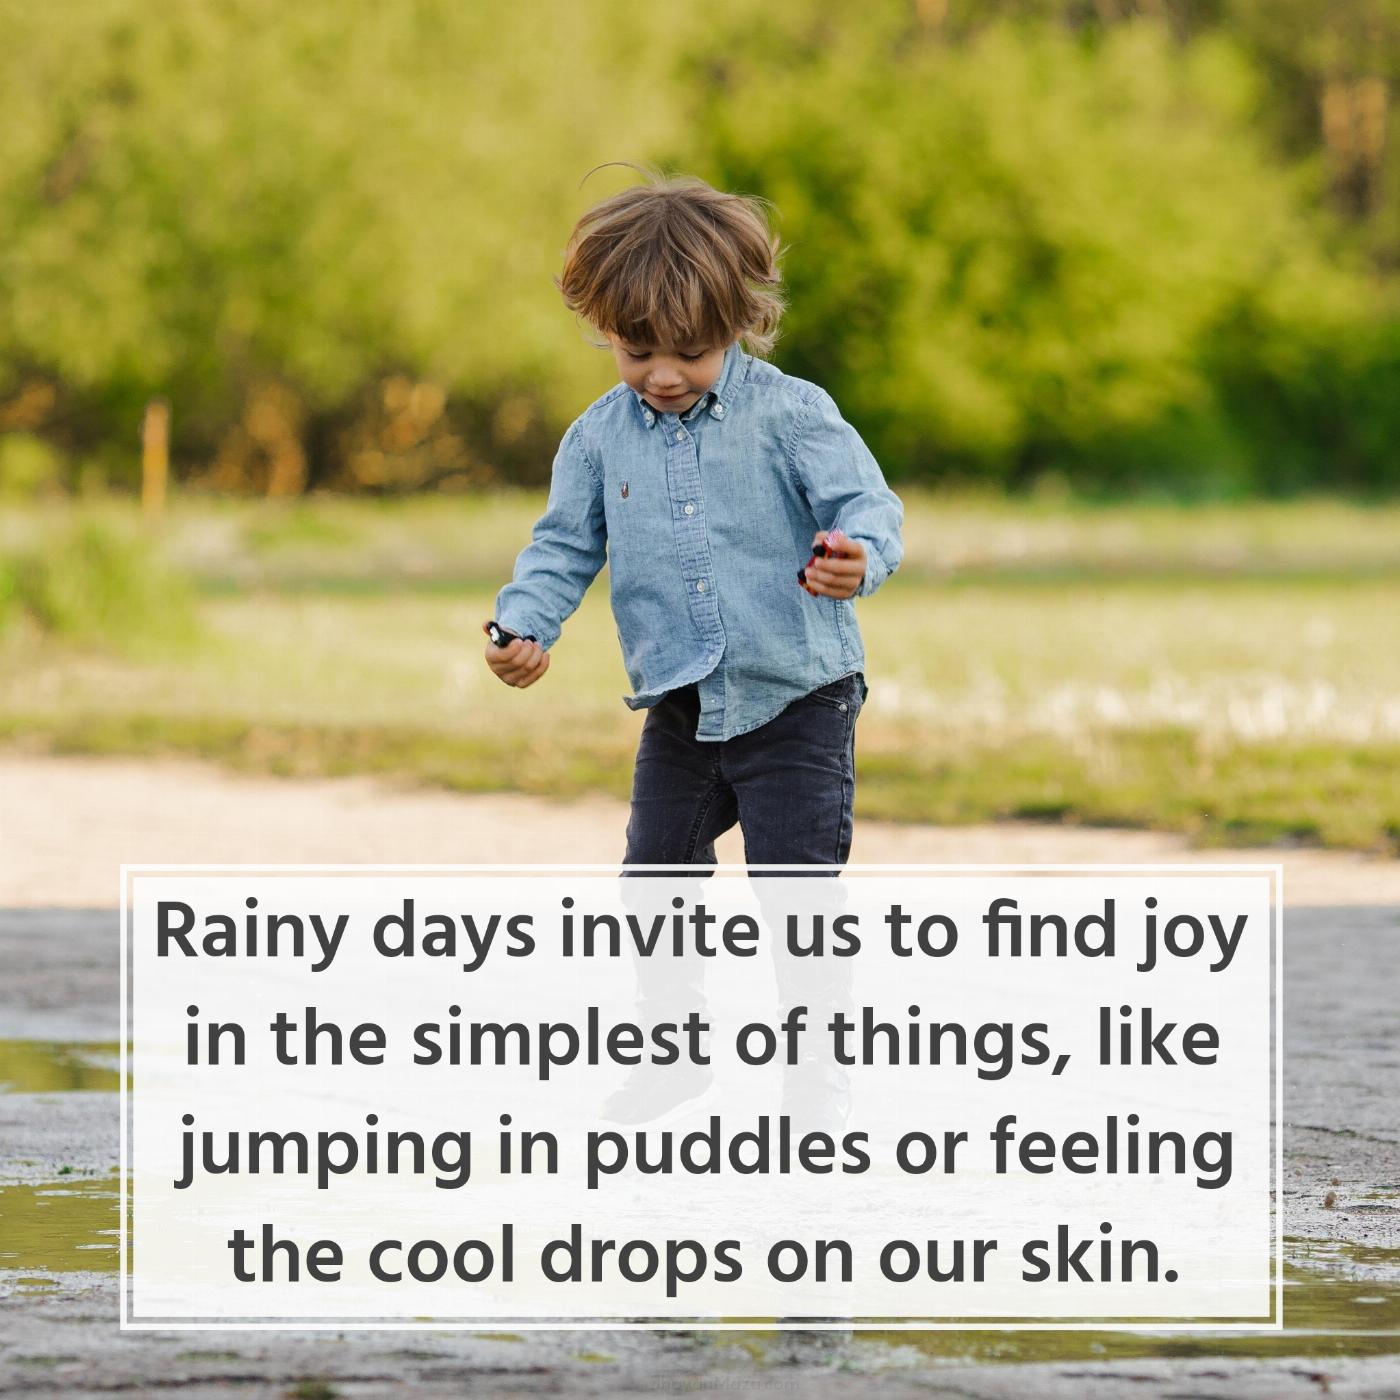 Rainy days invite us to find joy in the simplest of things